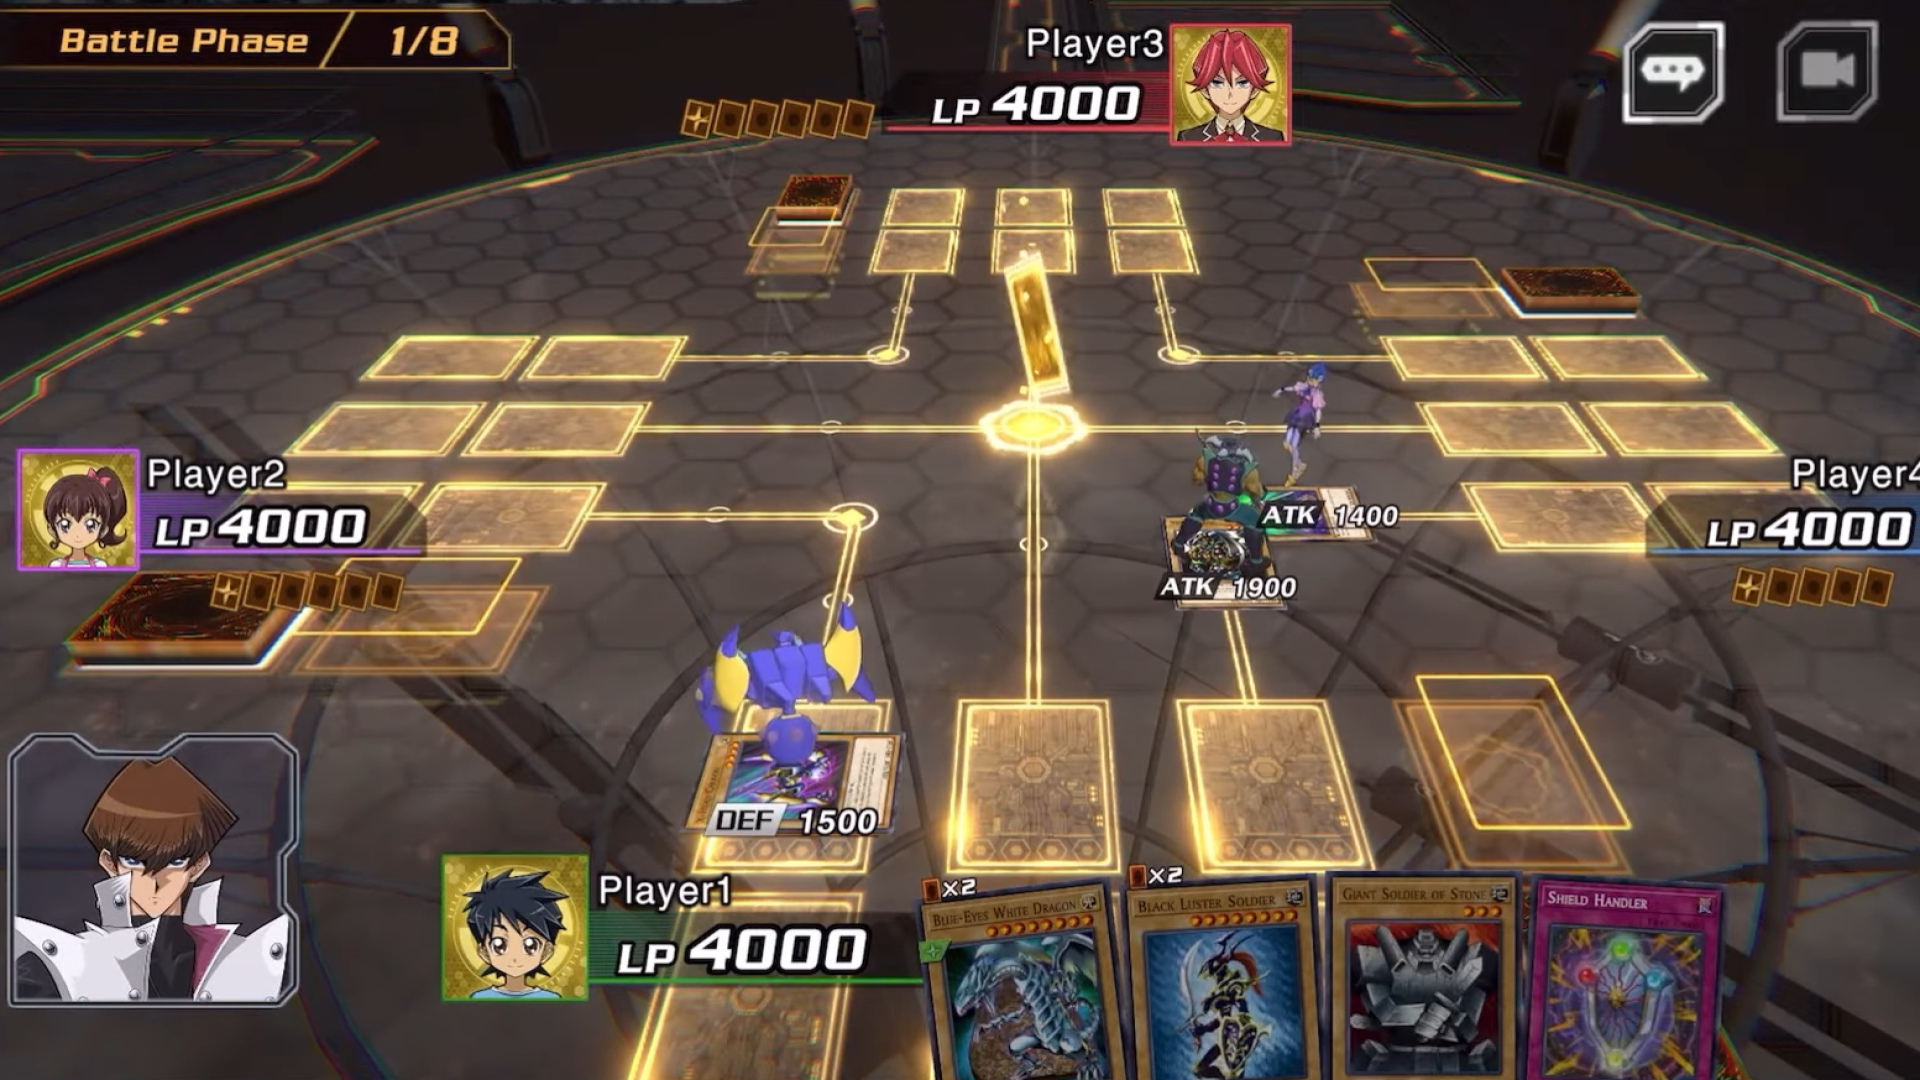 A screenshot from the announcement trailer for Yu-Gi-Oh! Cross Duel from Konami.